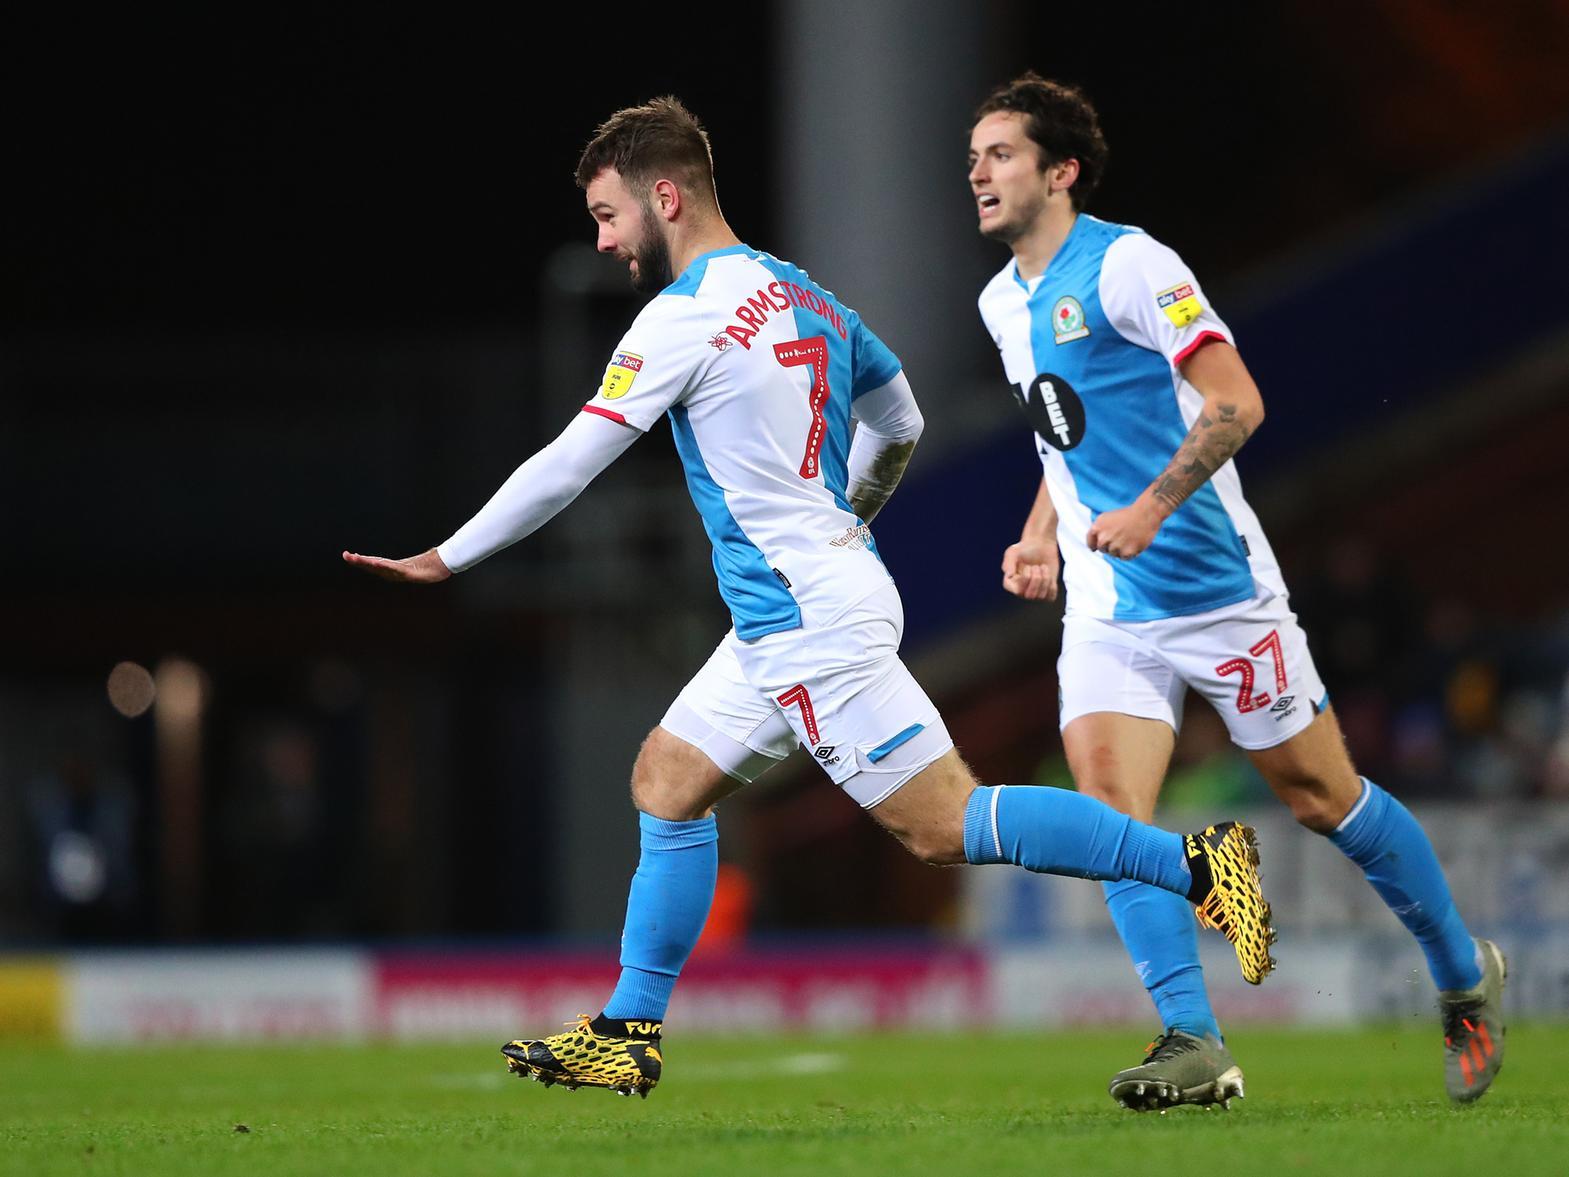 Blackburn Rovers forward Adam Armstrong is said to have attracted to interest of a number of top tier sides, after a blistering spell that has seen him score four goals and make four assists in nine games. (The Chronicle)